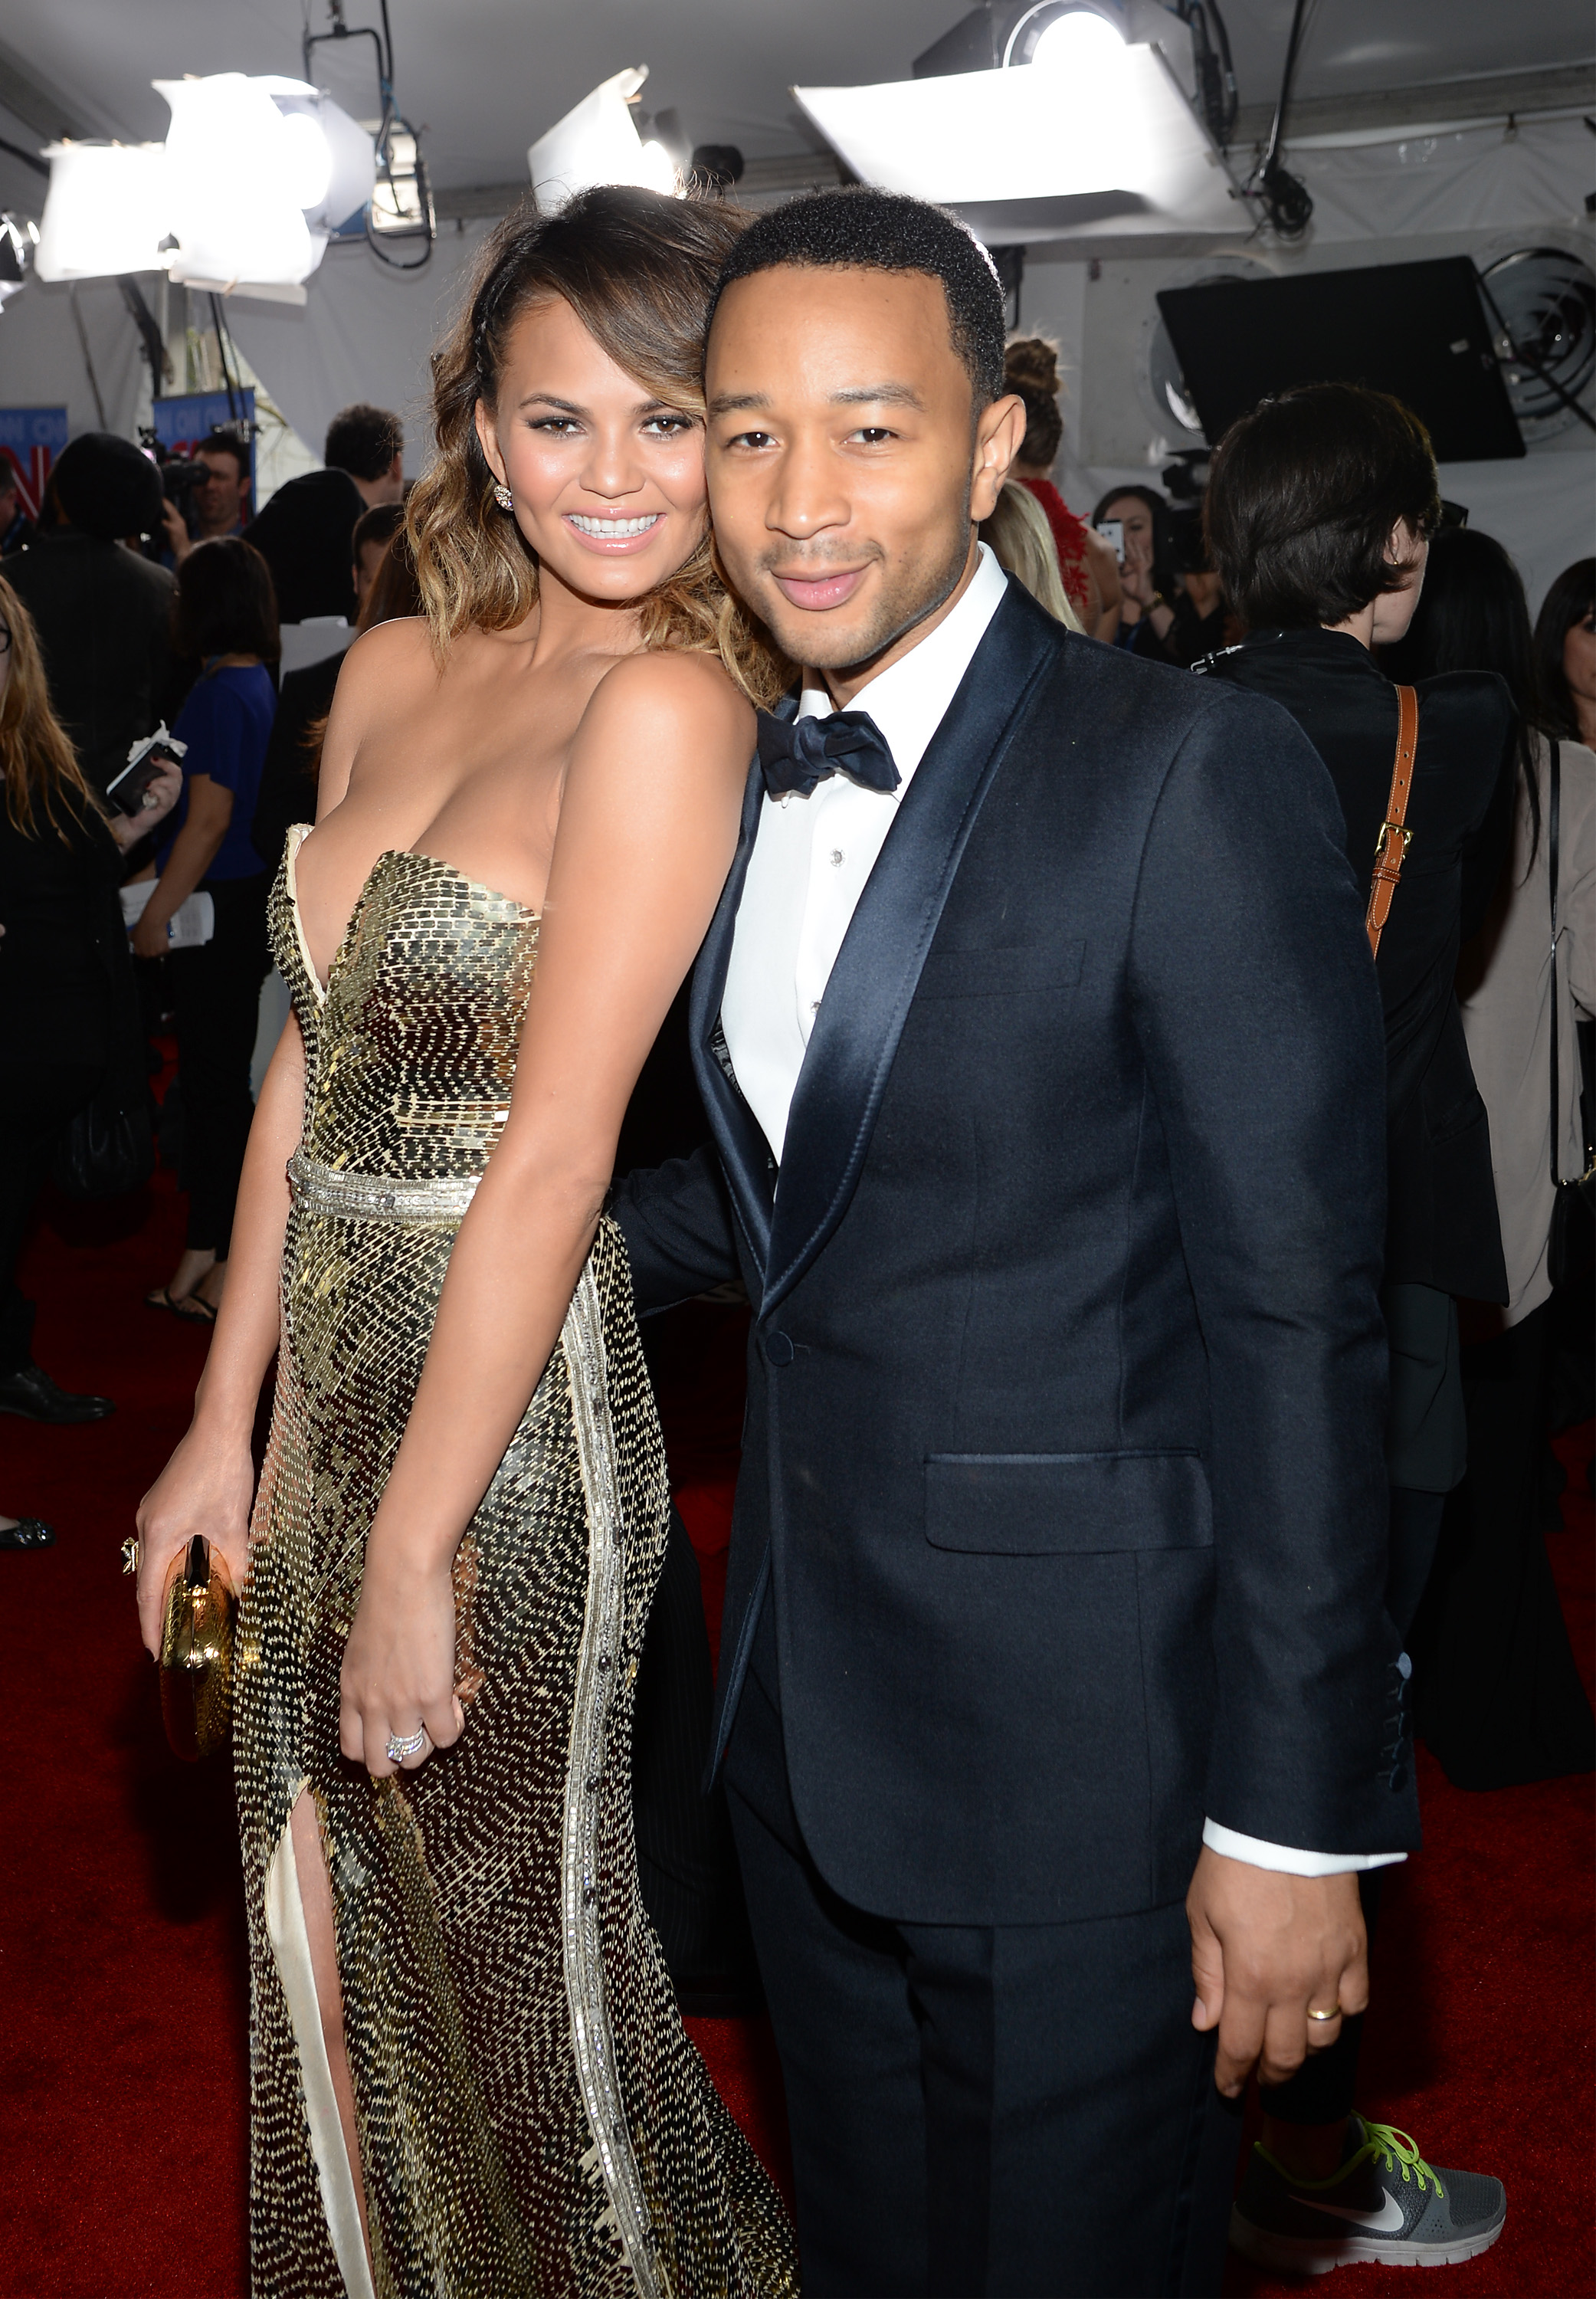 Chrissy Teigen and John Legend at the 56th Grammy Awards in Los Angeles, 2014 | Source: Getty Images